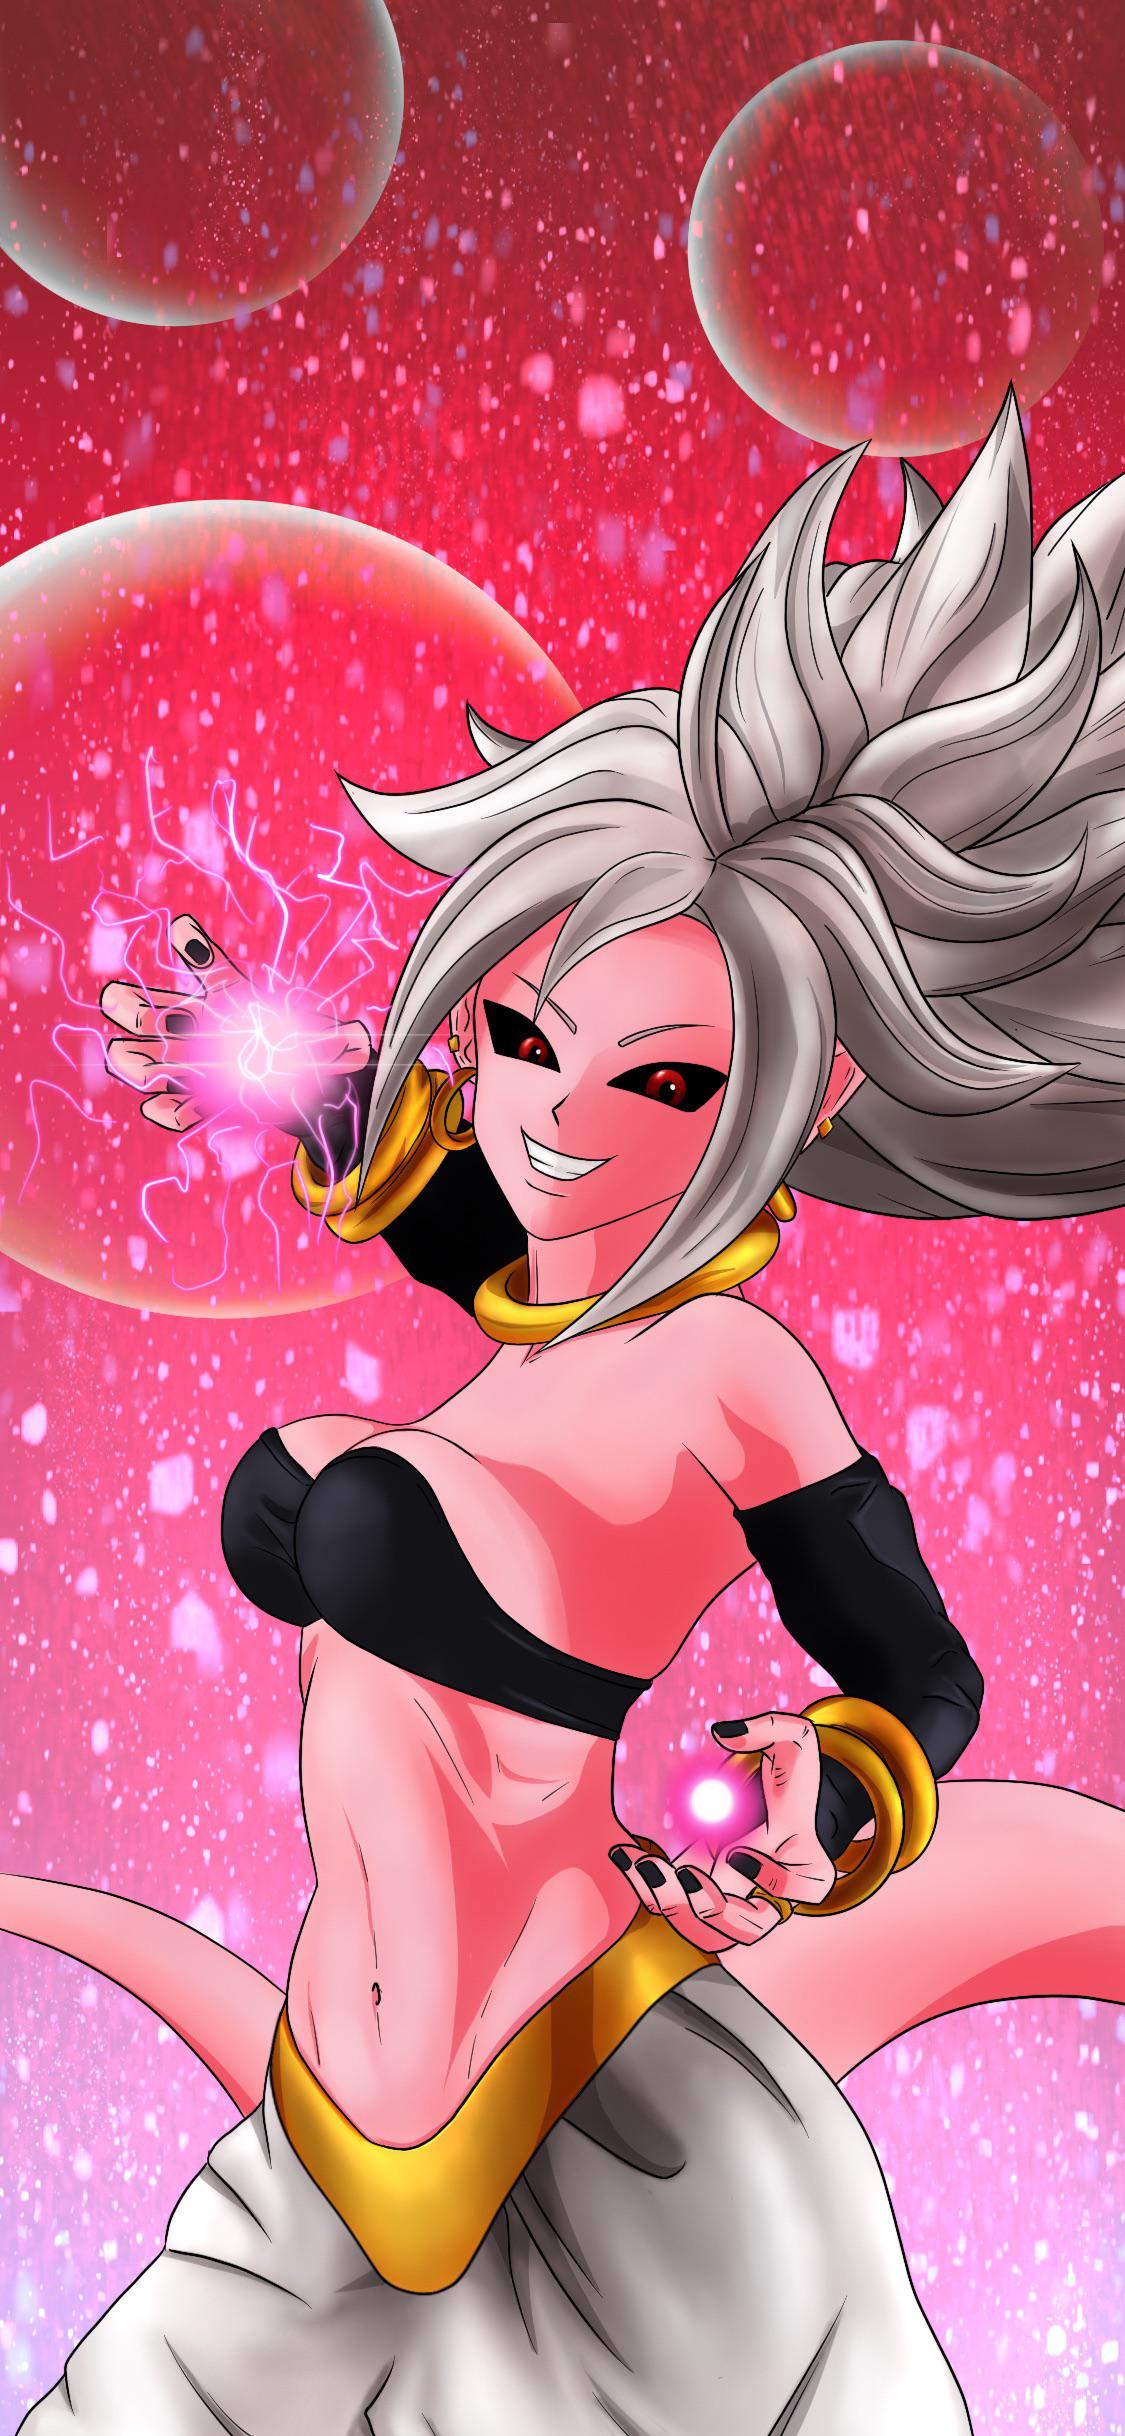 Made an Android 21 wallpaper for my gf, thought someone might want it here too!